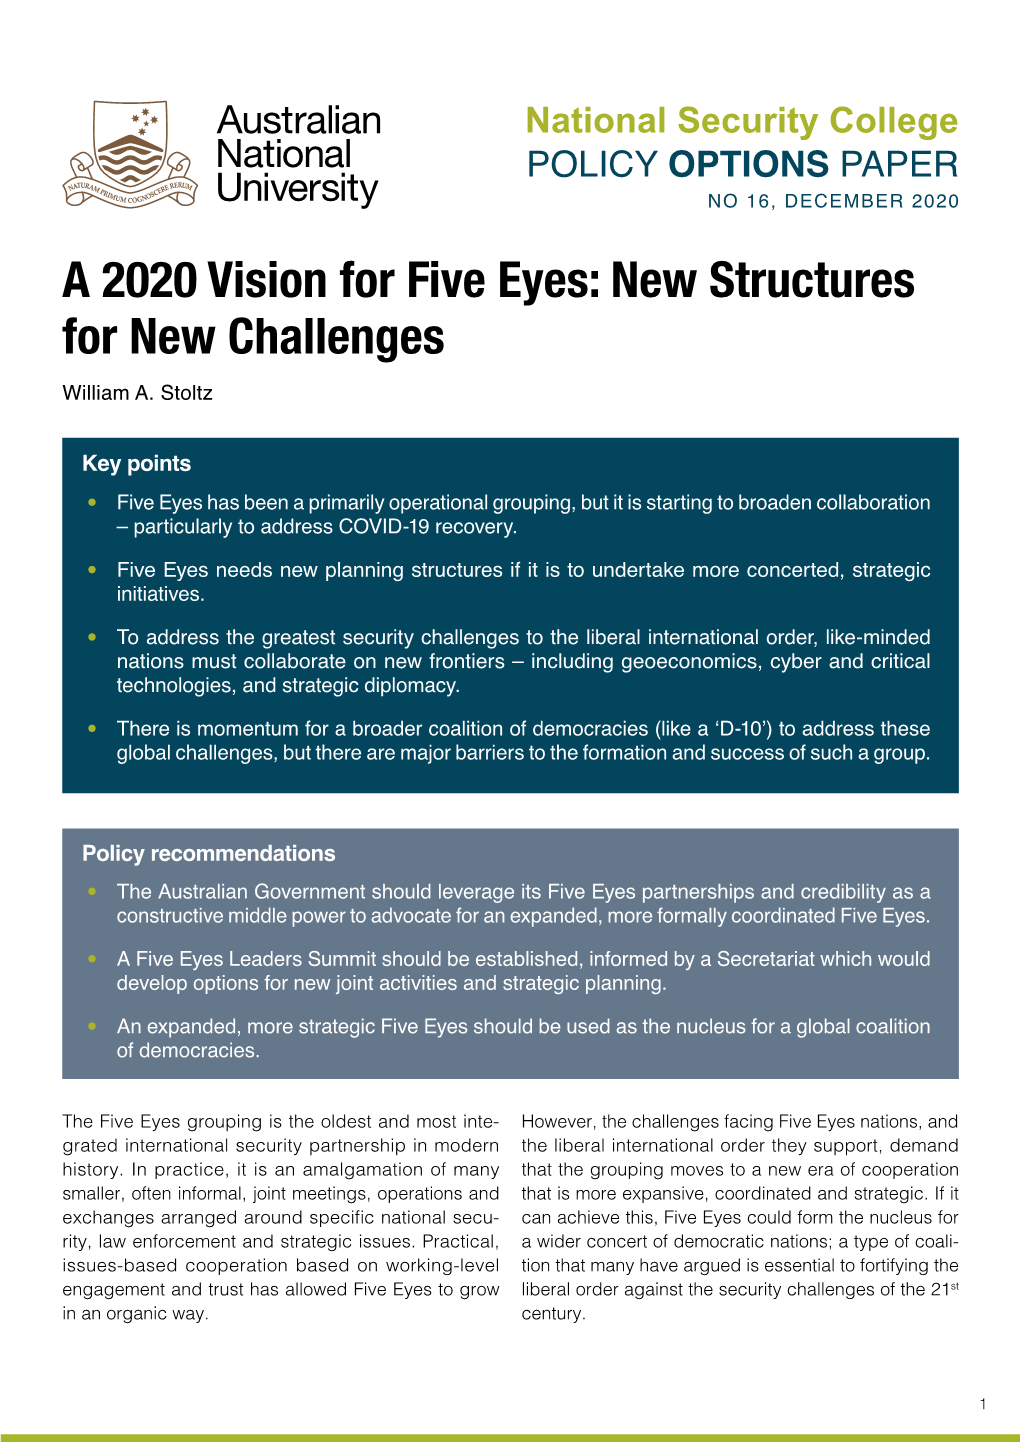 A 2020 Vision for Five Eyes: New Structures for New Challenges William A